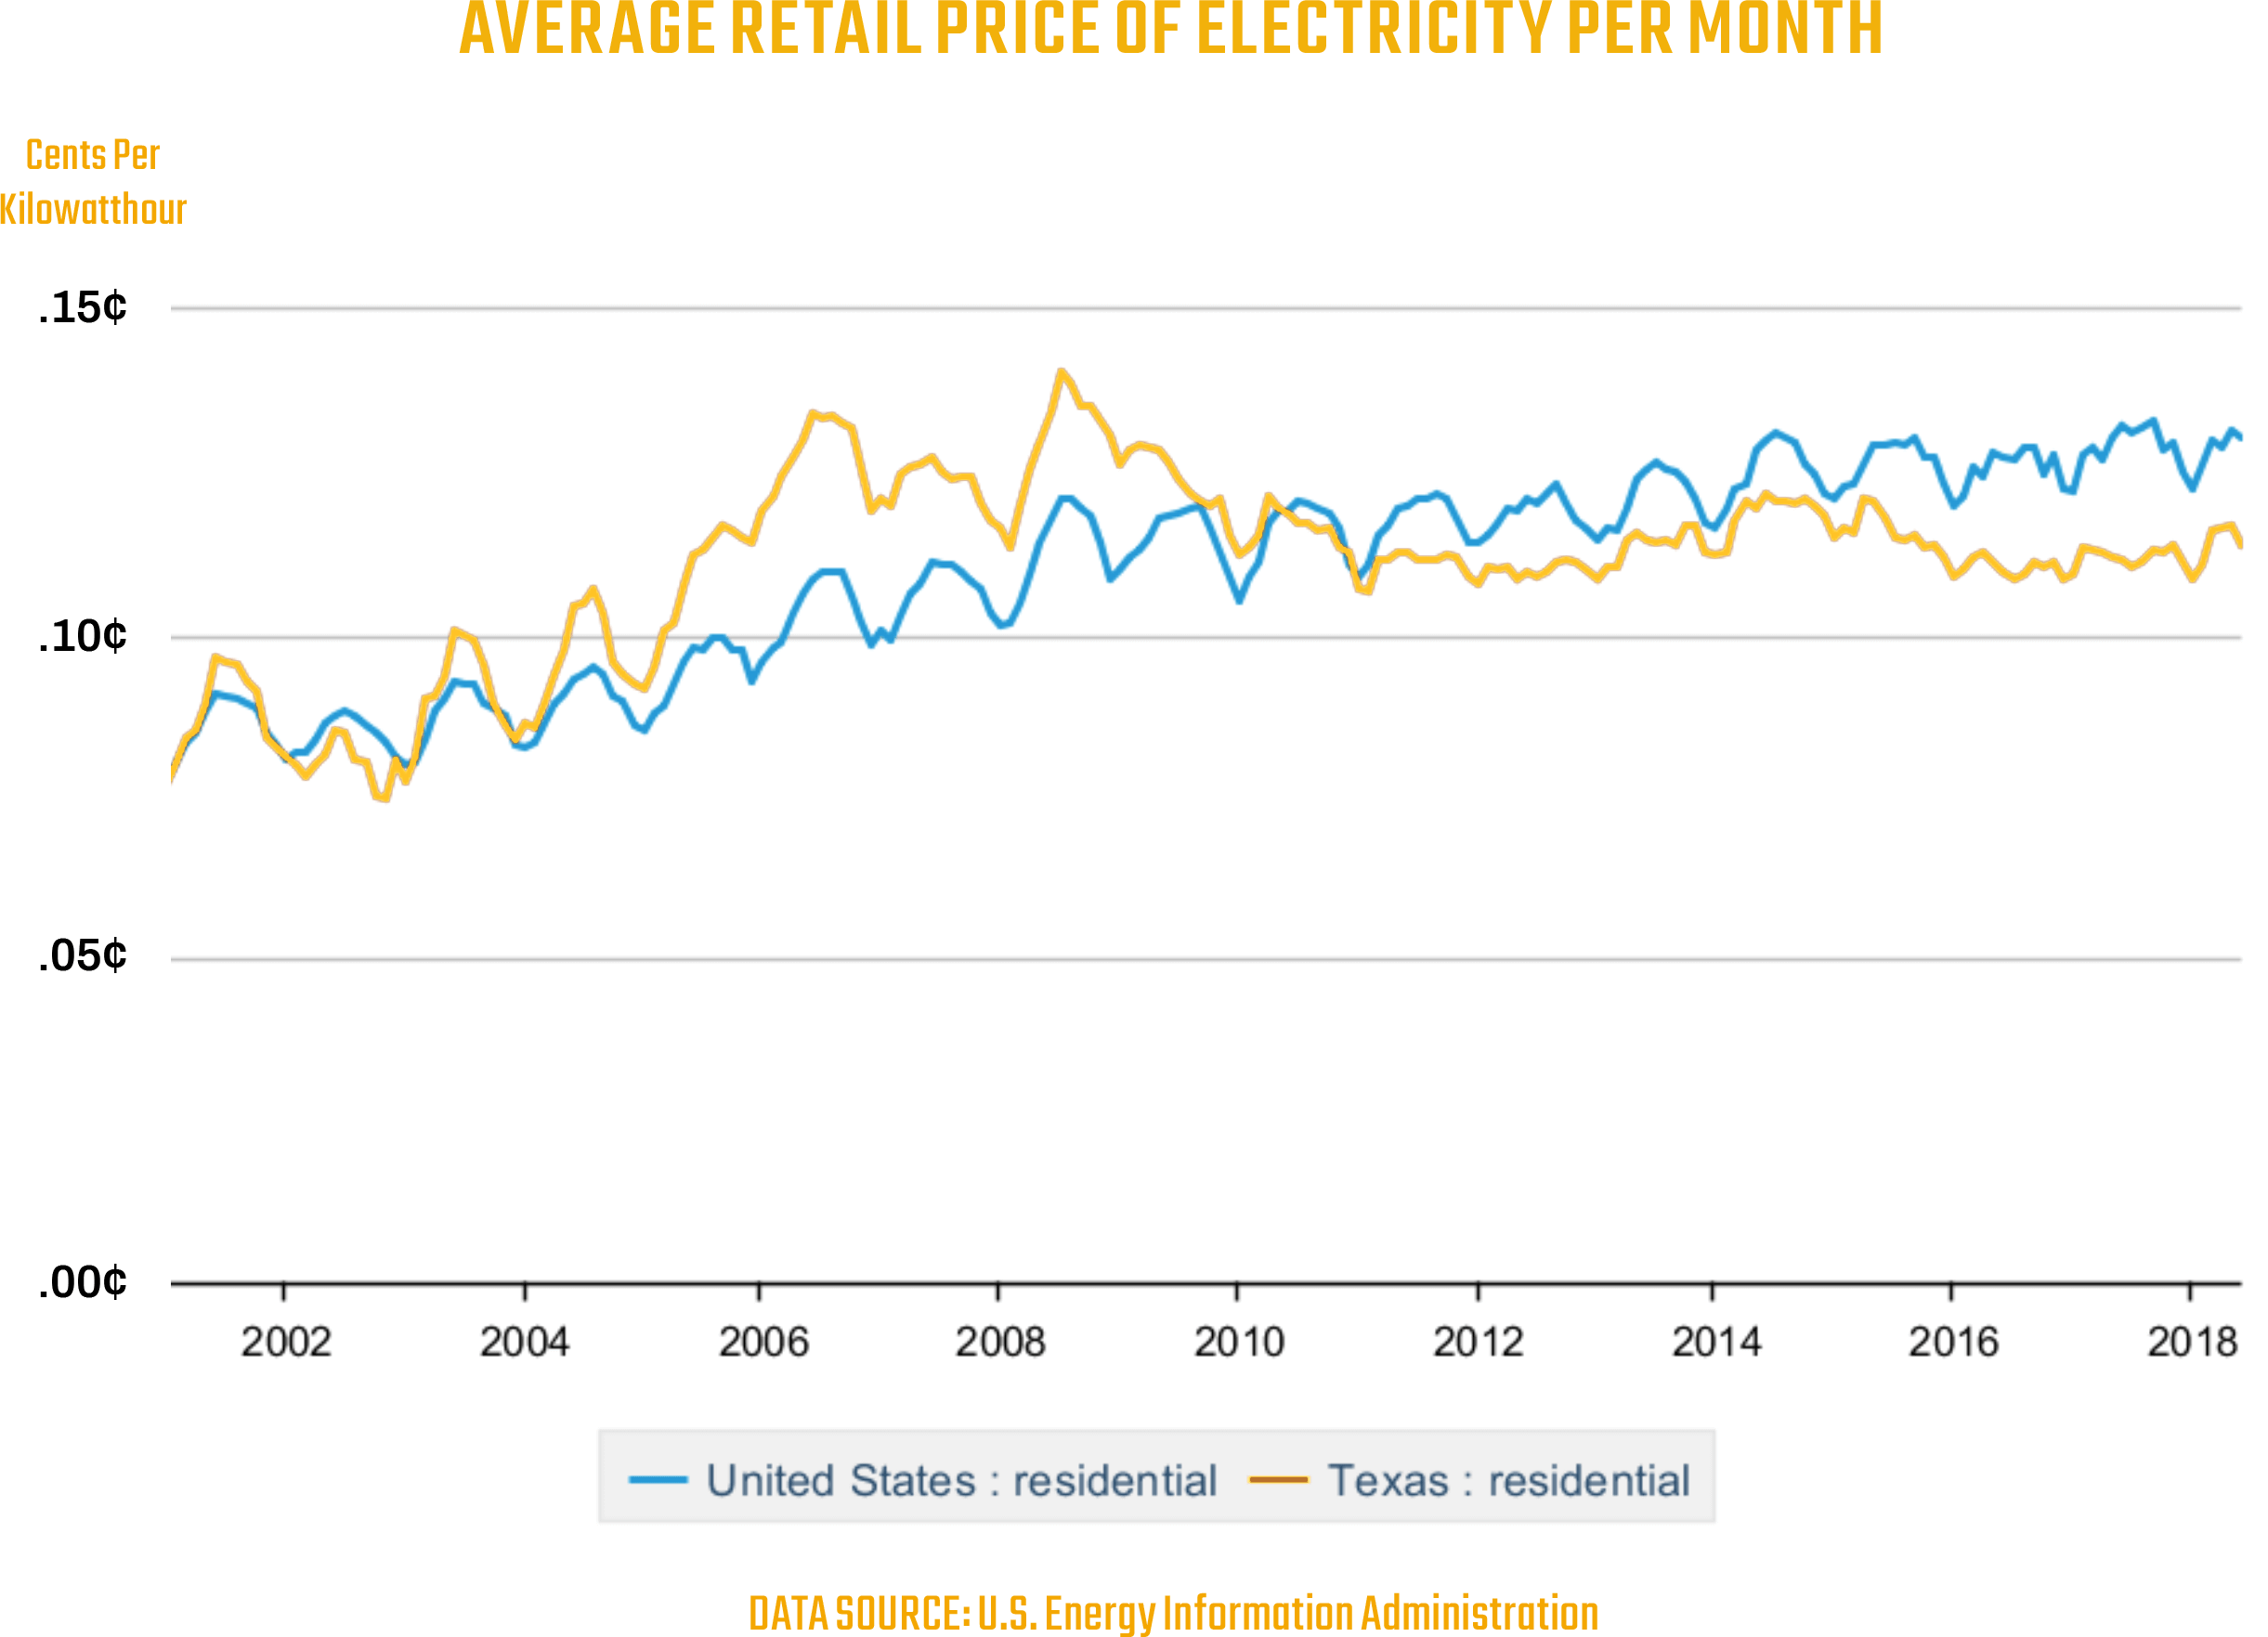 Average Retail Price of Electricity per Month